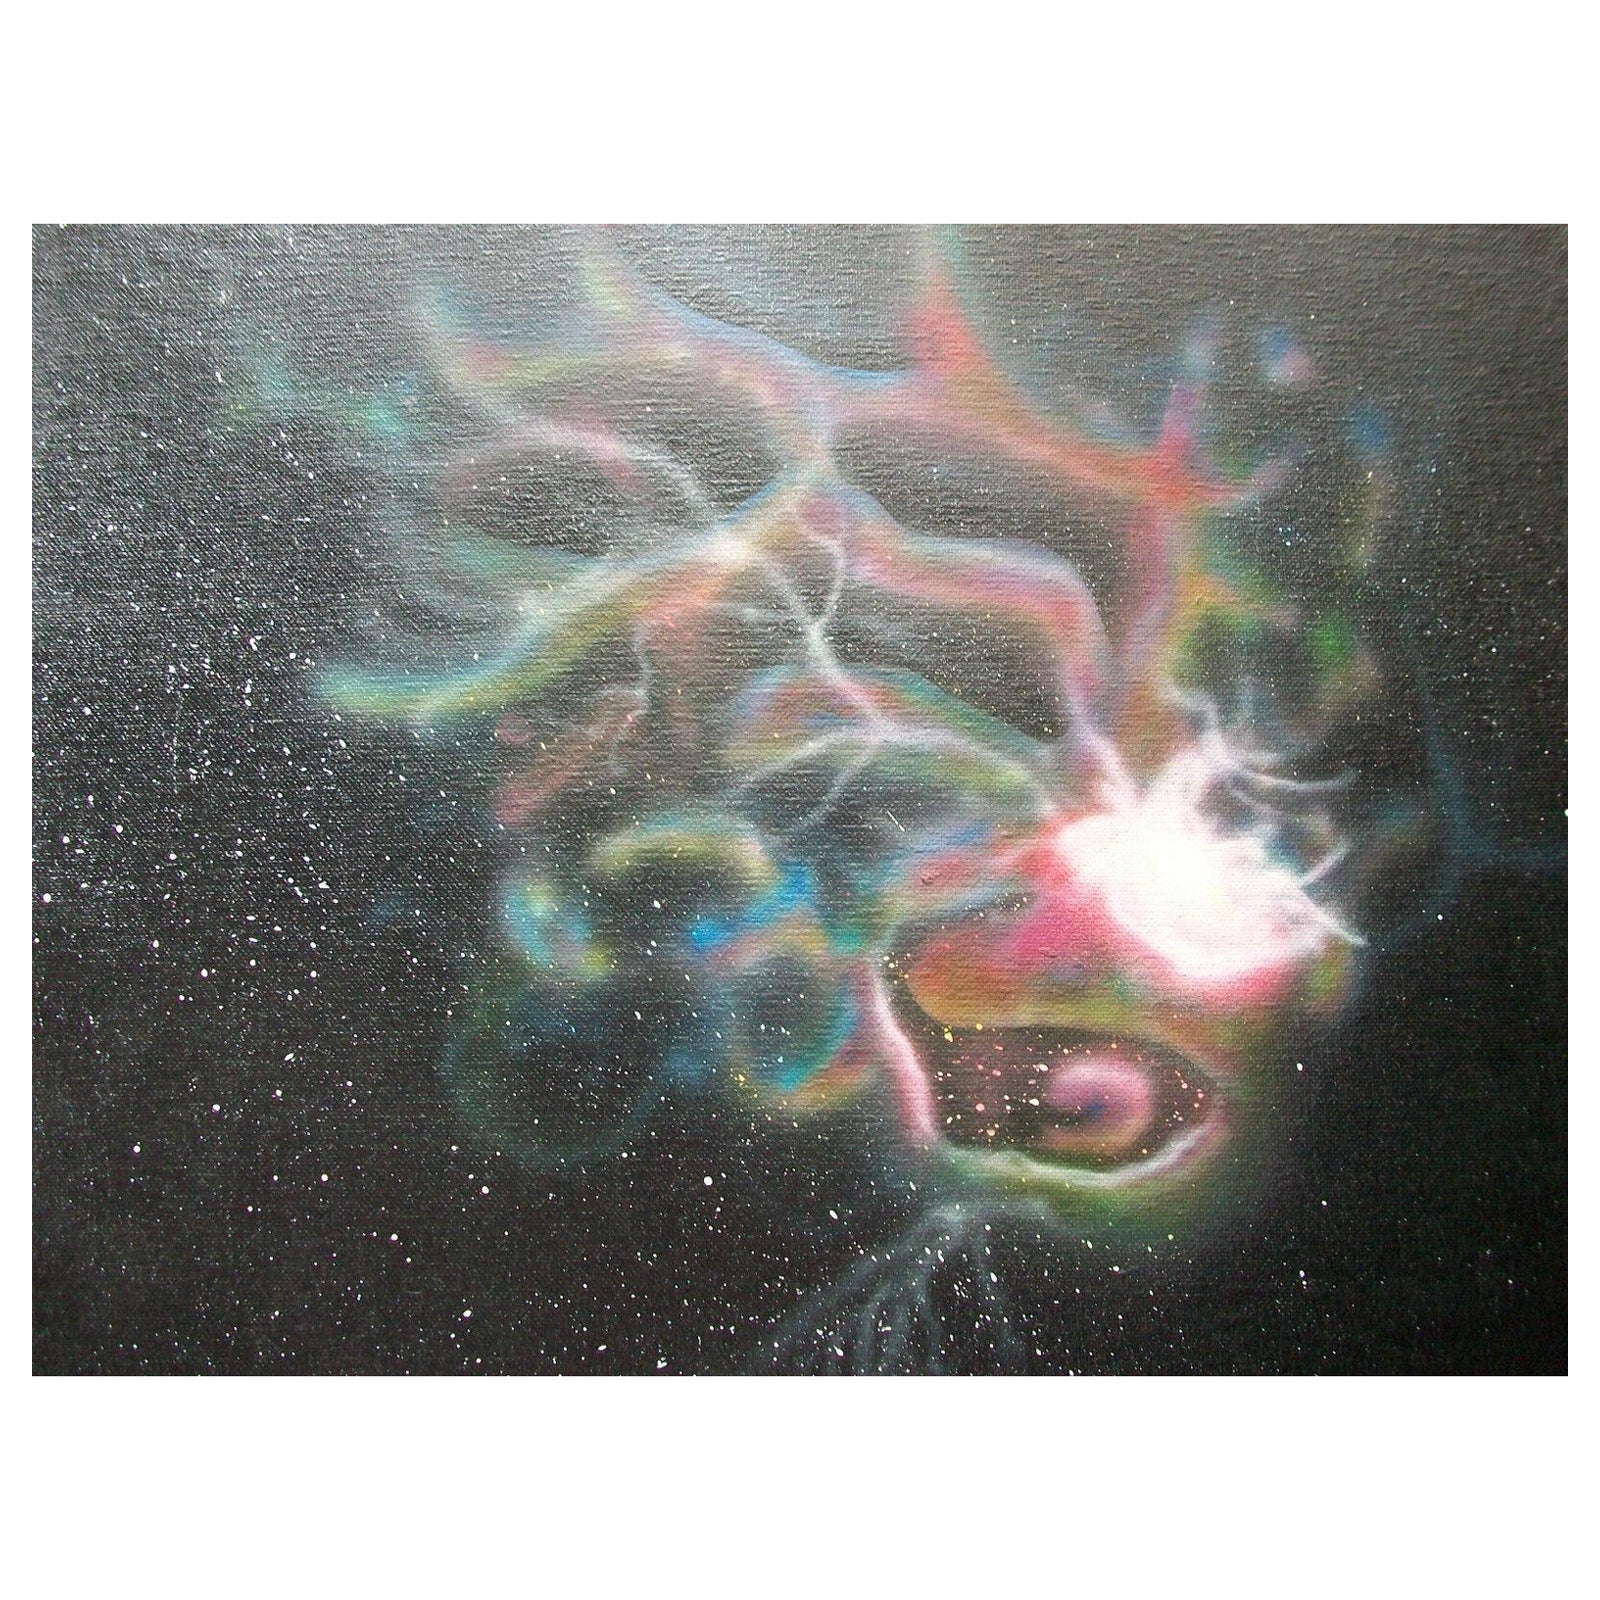 AURORA BOREALIS (Northern Lights) Vintage Oil Painting - Unsigned - Late 20th C.